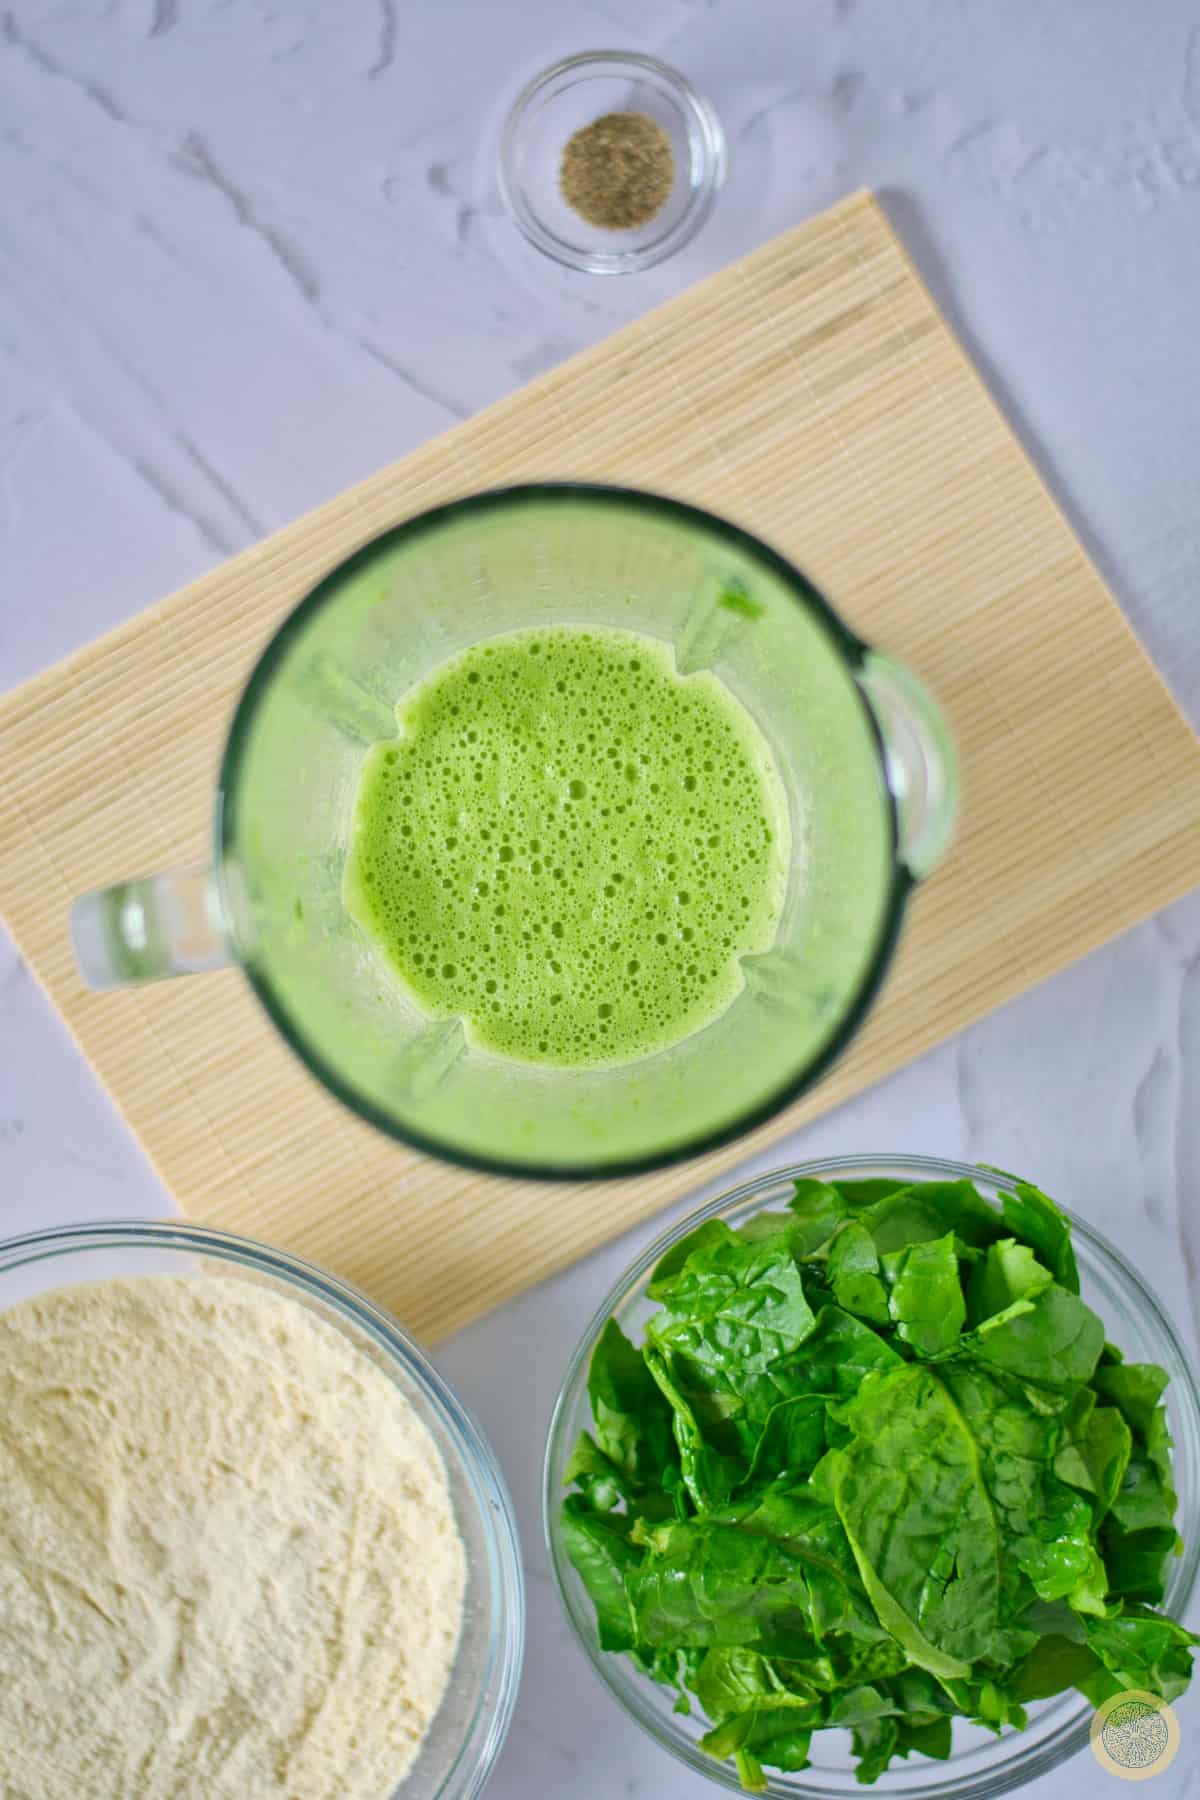 blender combine the spinach